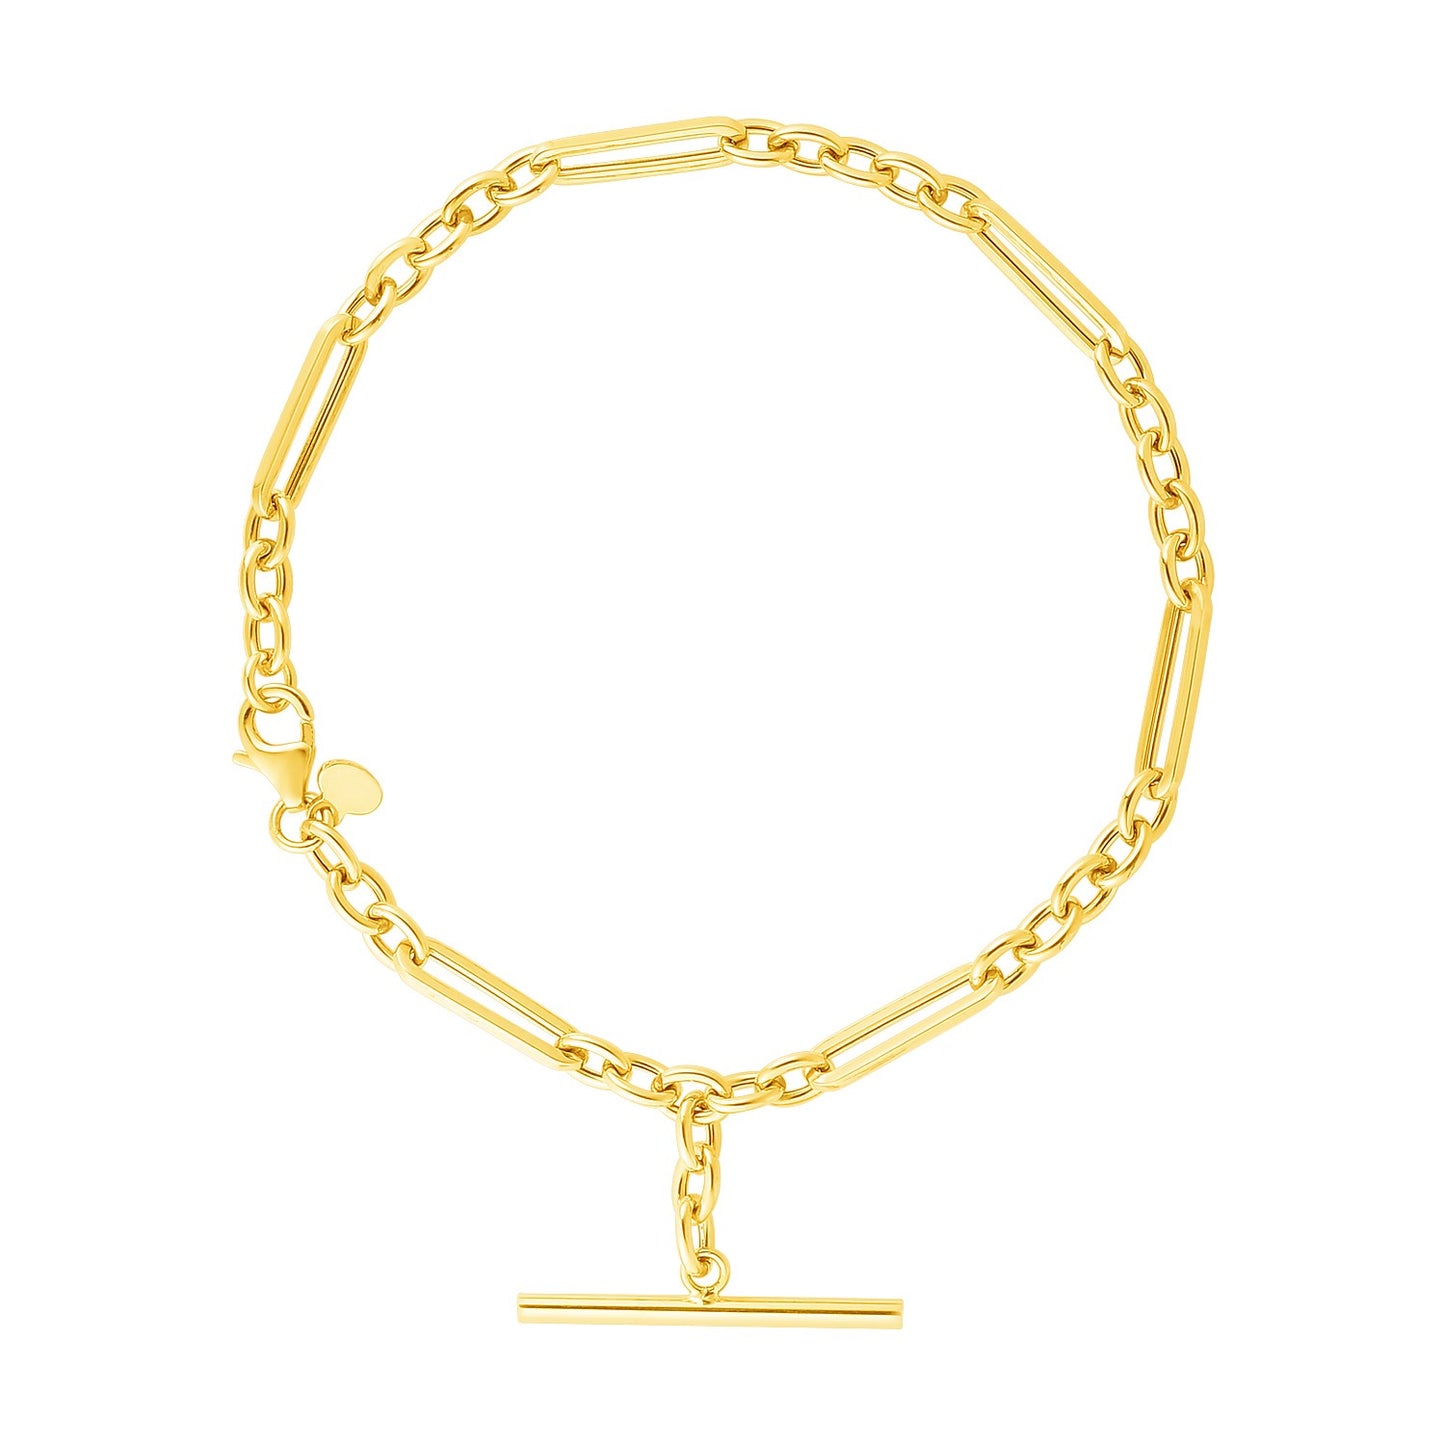 14k Yellow Gold 7 1/5 inch Alternating Oval and Round Chain Bracelet with Toggle